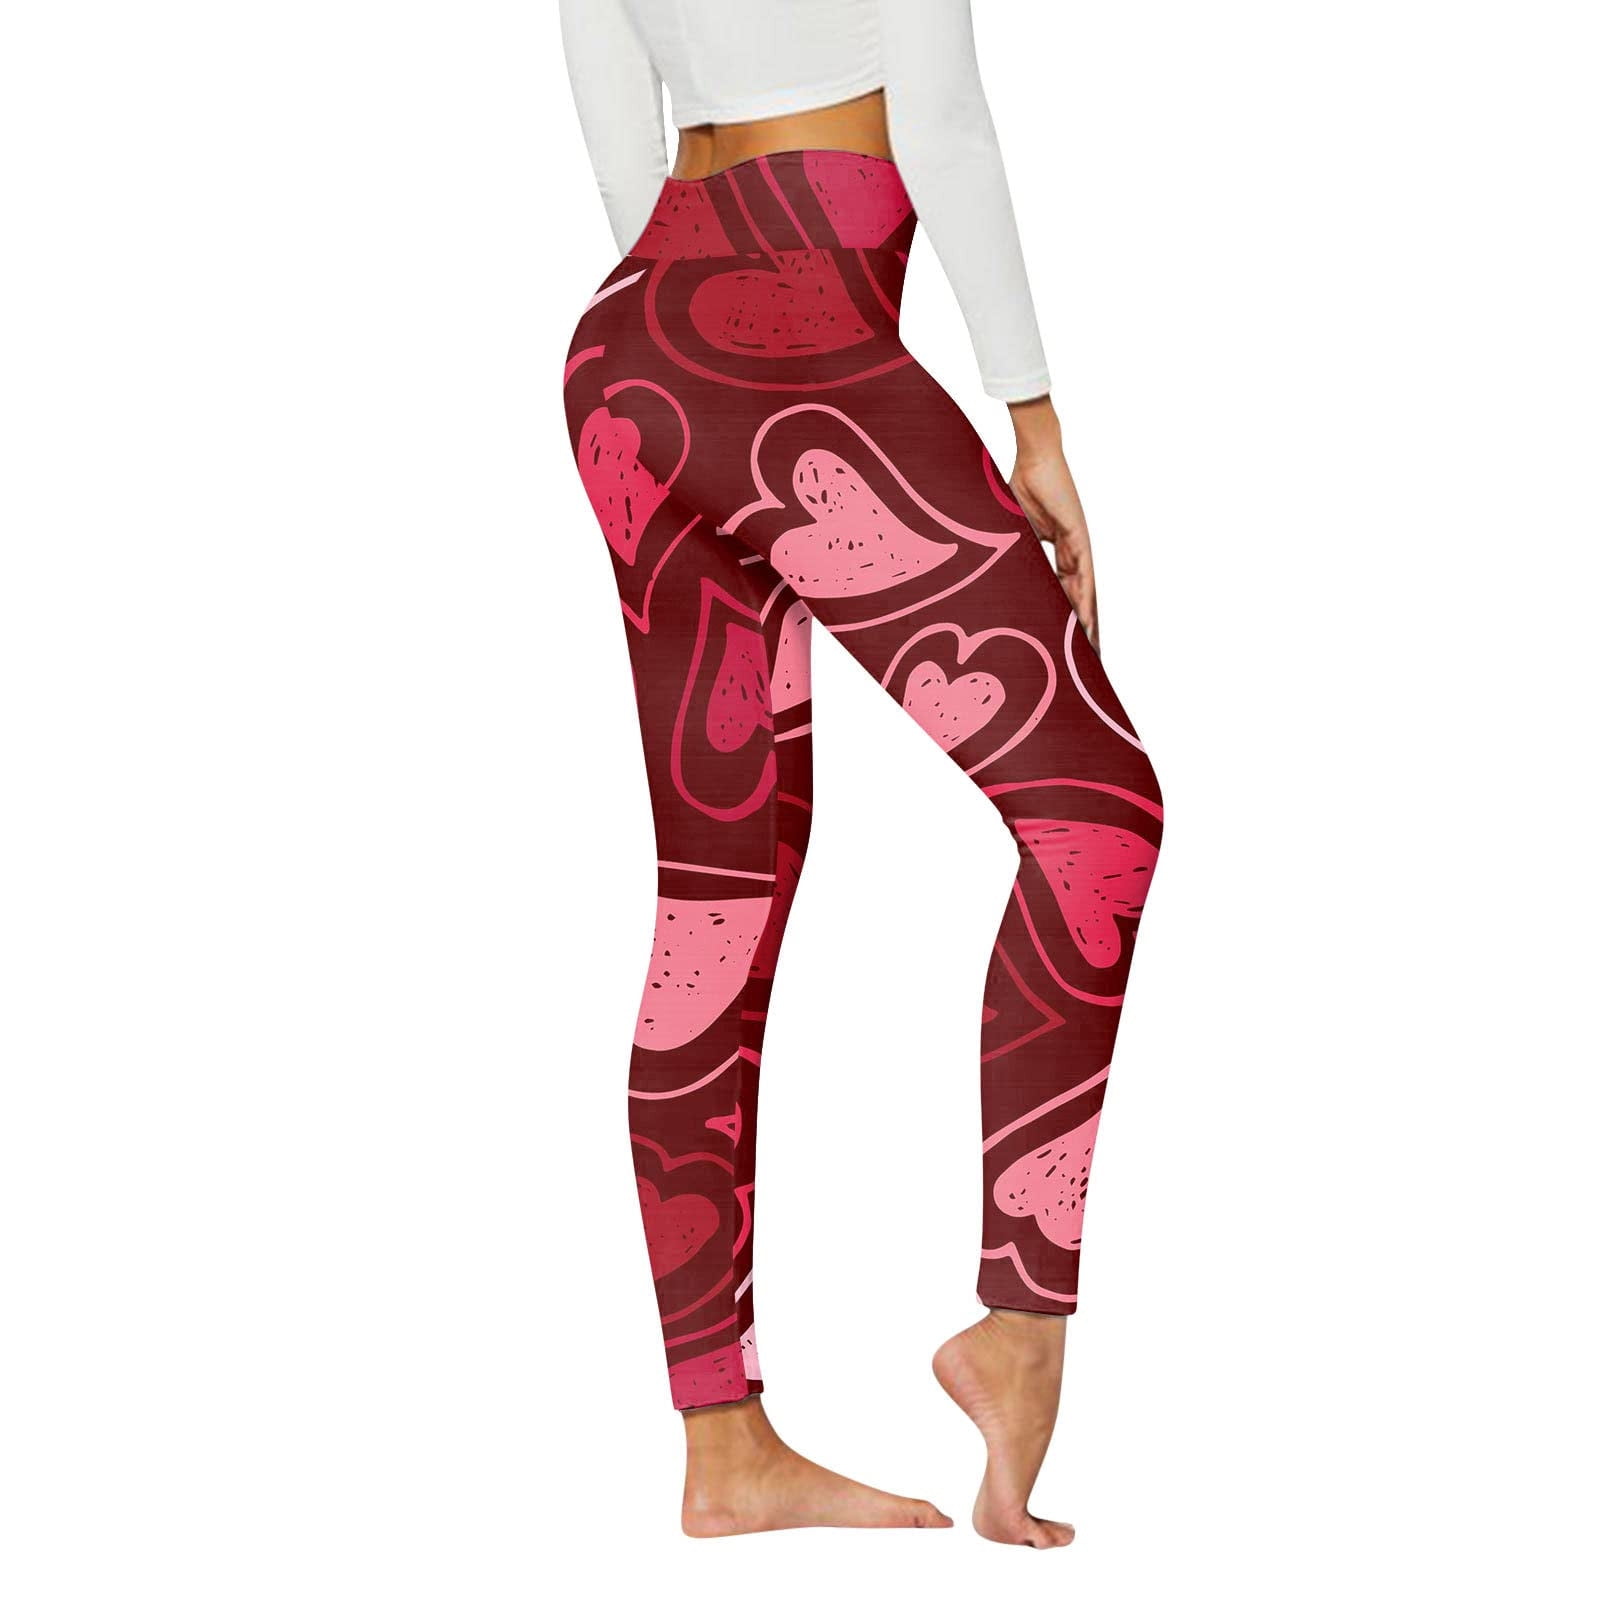 EGNMCR High Waist Yoga Pants for Women Valentine's Day Heart Print Slim Fit  Full Length Active Pants Tummy Control Gym Workout Fitness Leggings on  Clearance 